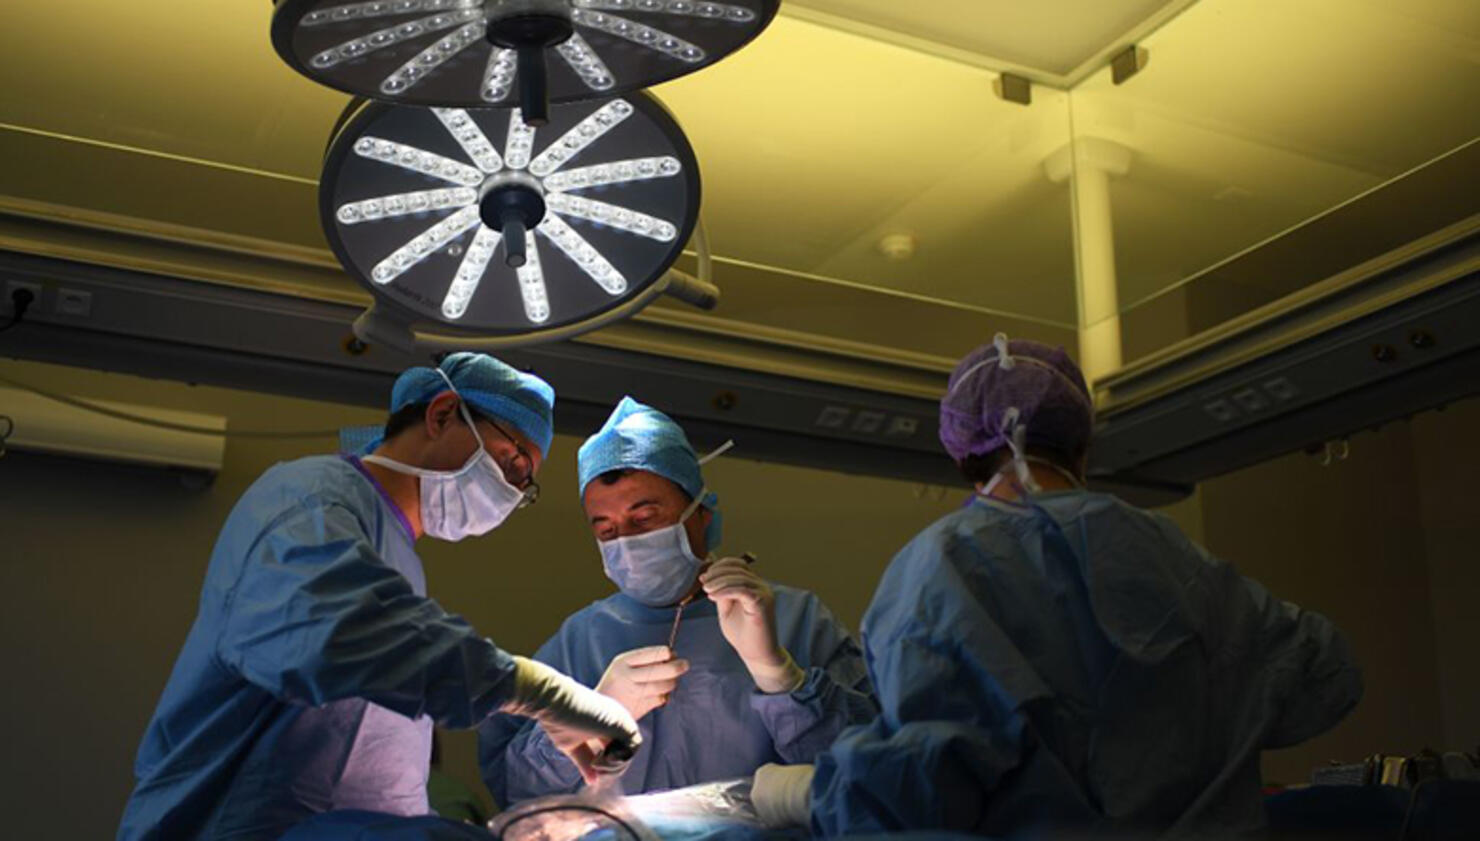 Surgeons Played Metal in Operating Room for Critical Patient